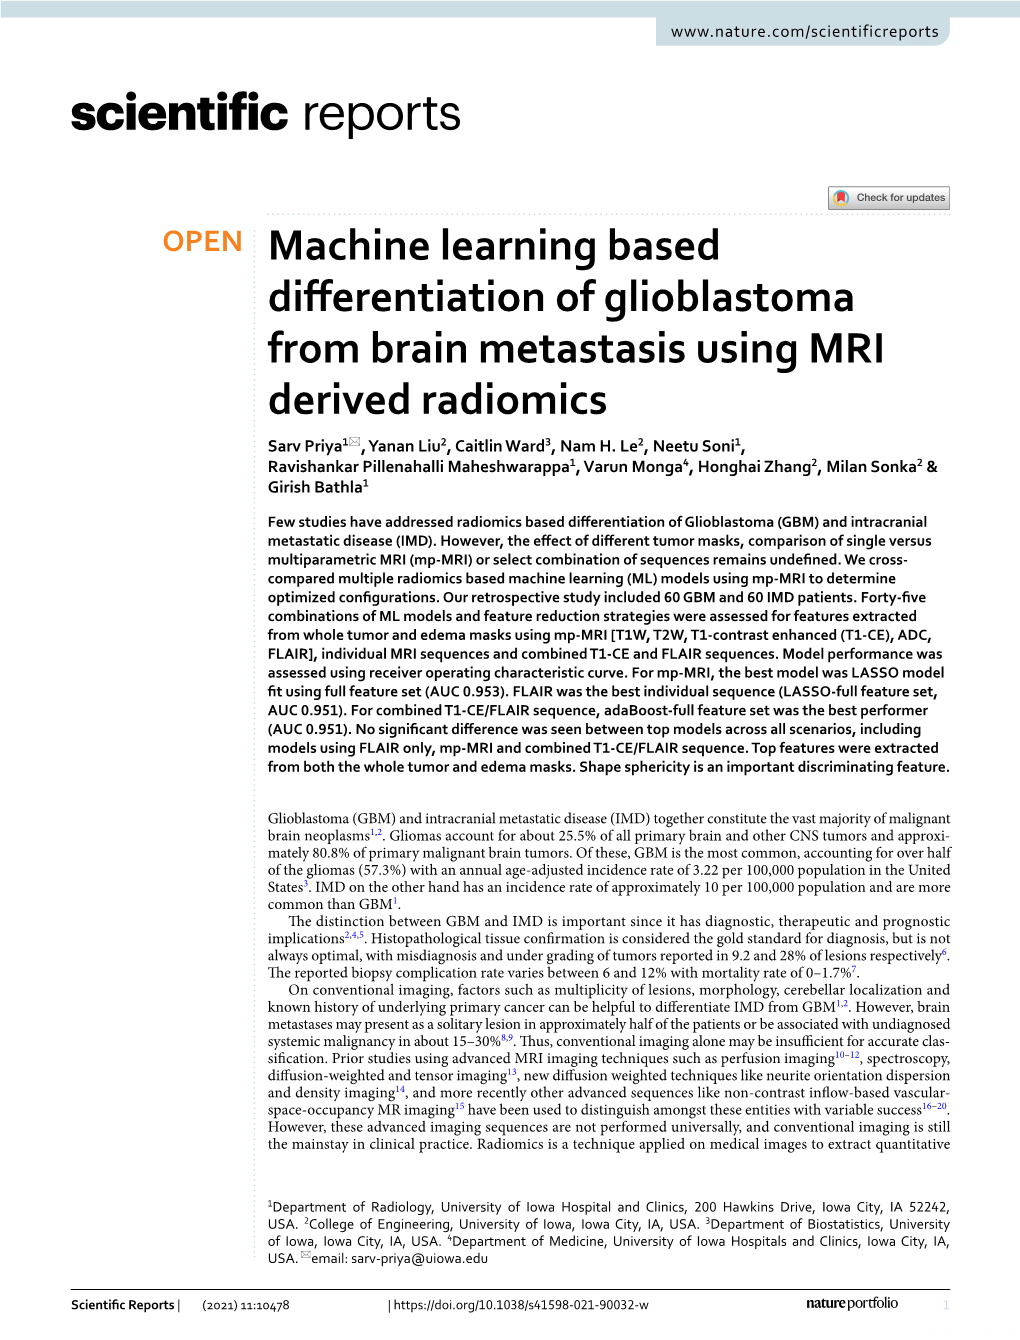 Machine Learning Based Differentiation of Glioblastoma from Brain